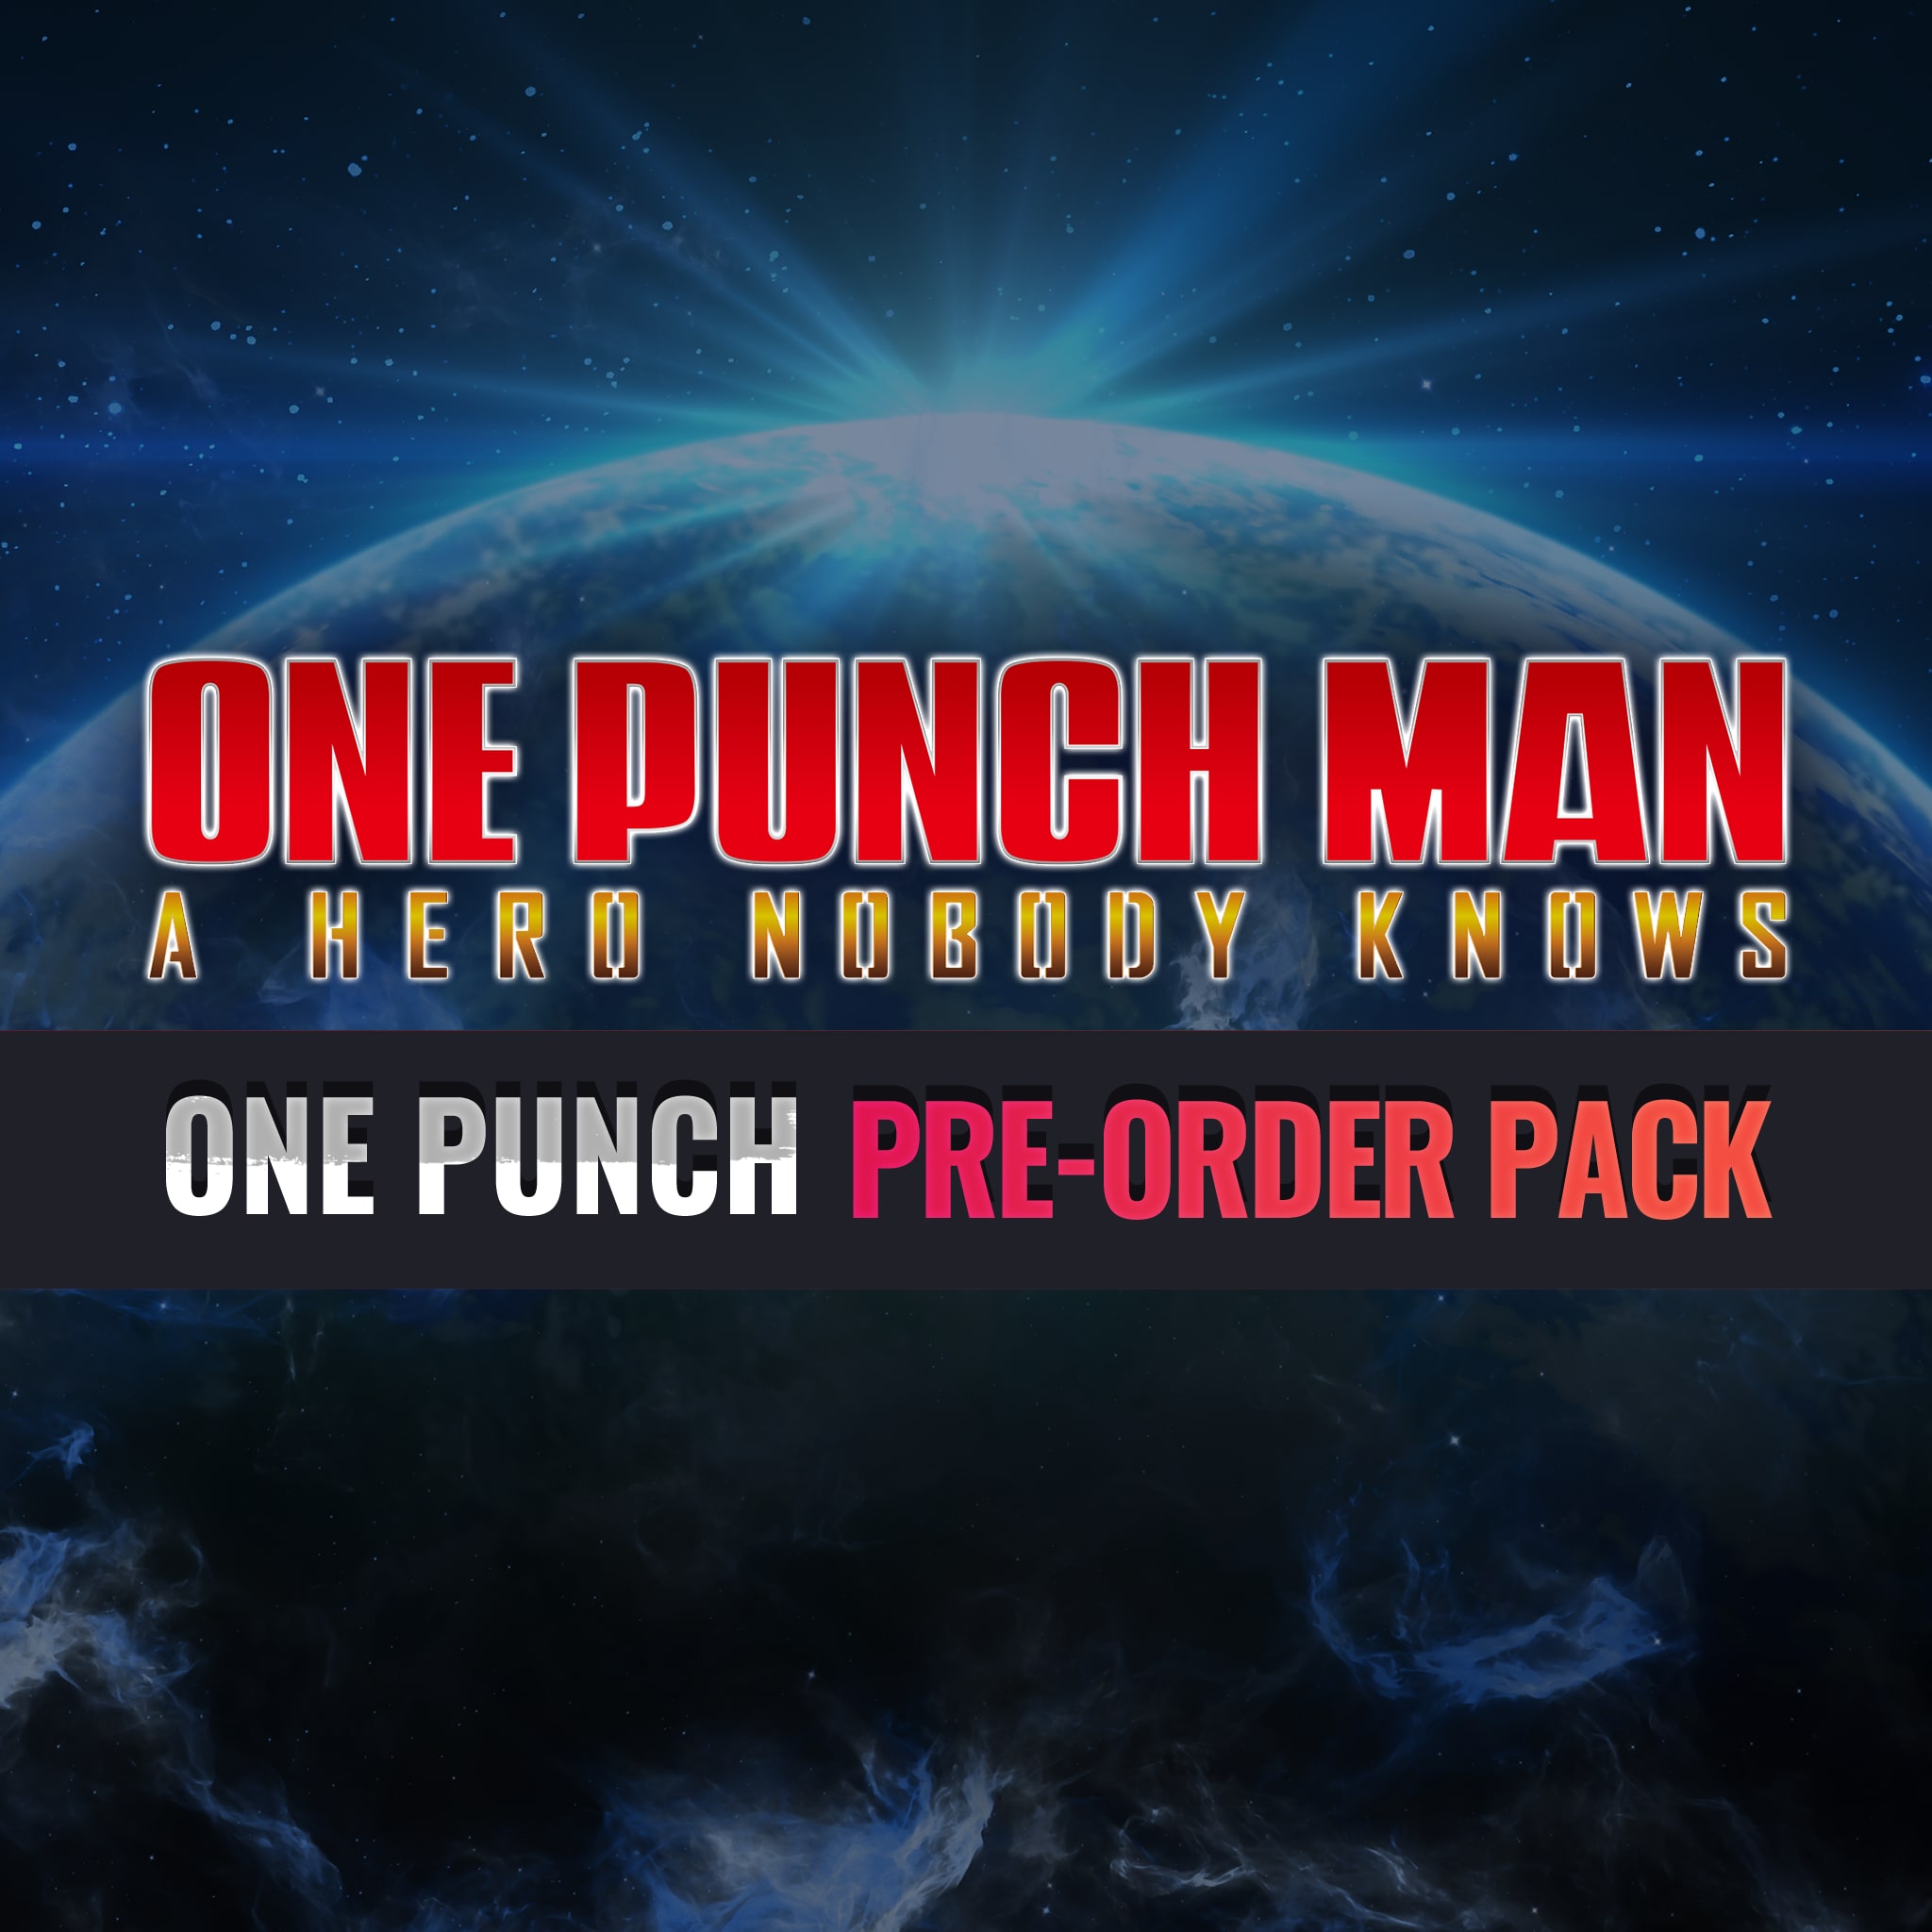 ONE PUNCH MAN: A HERO NOBODY KNOWS Pre-Order Pack